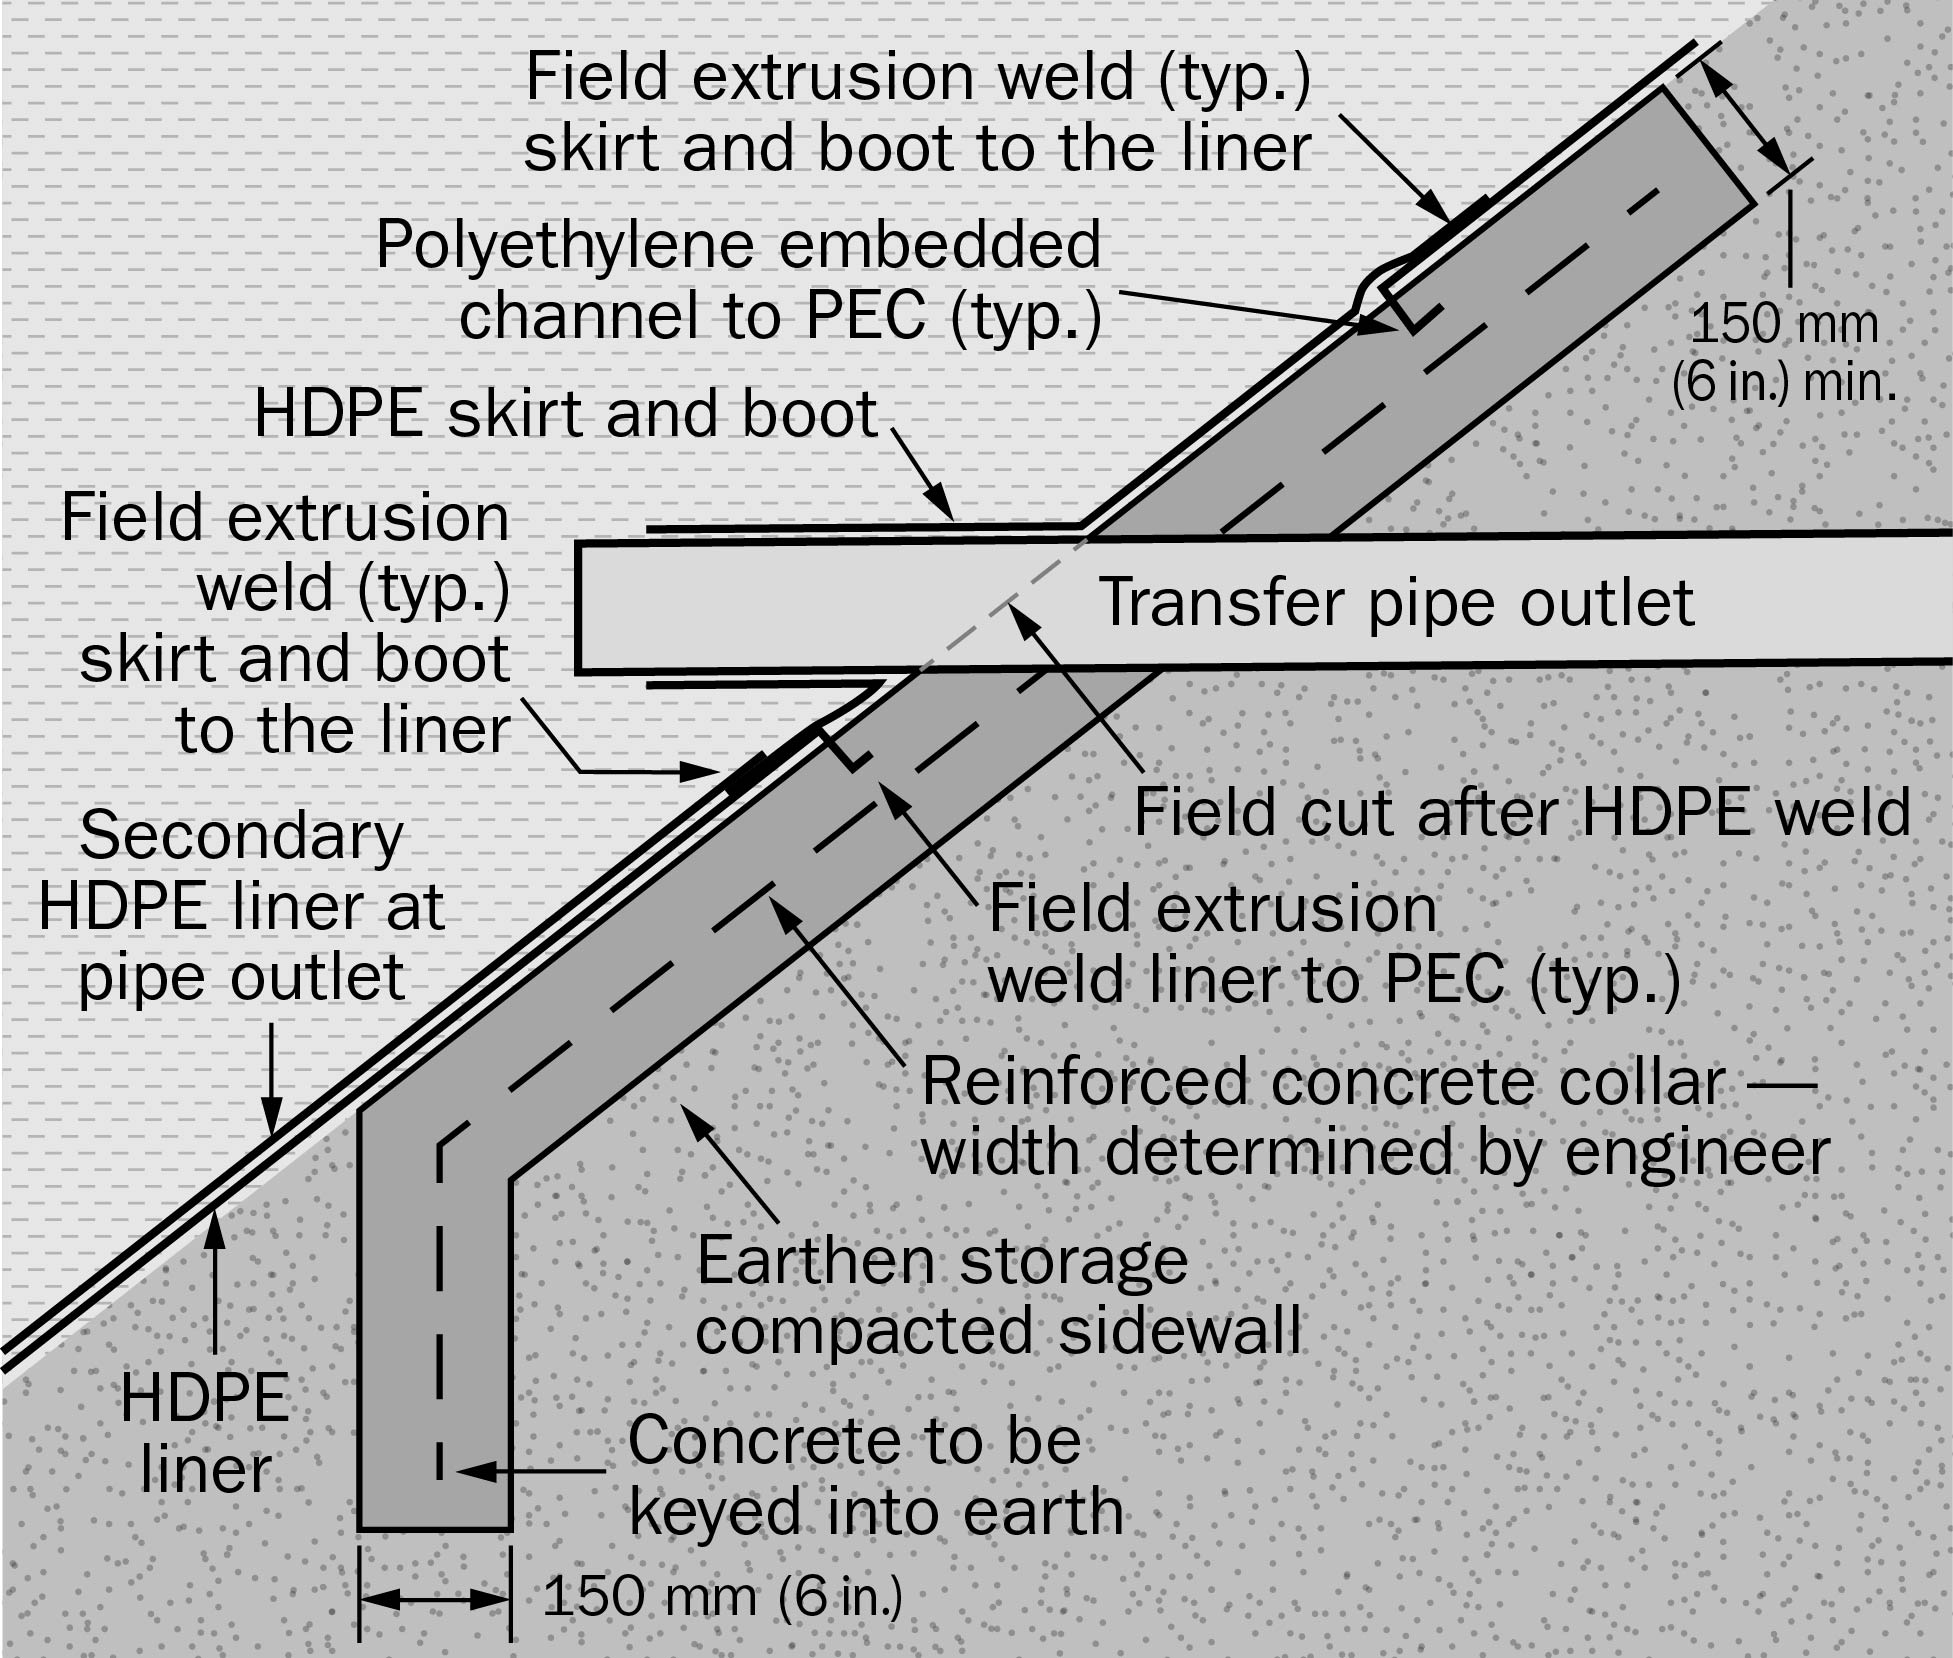 A drawing showing a cross-section of an earthen manure storage with pipe penetration through a HDPE line pond (synthetic liner).